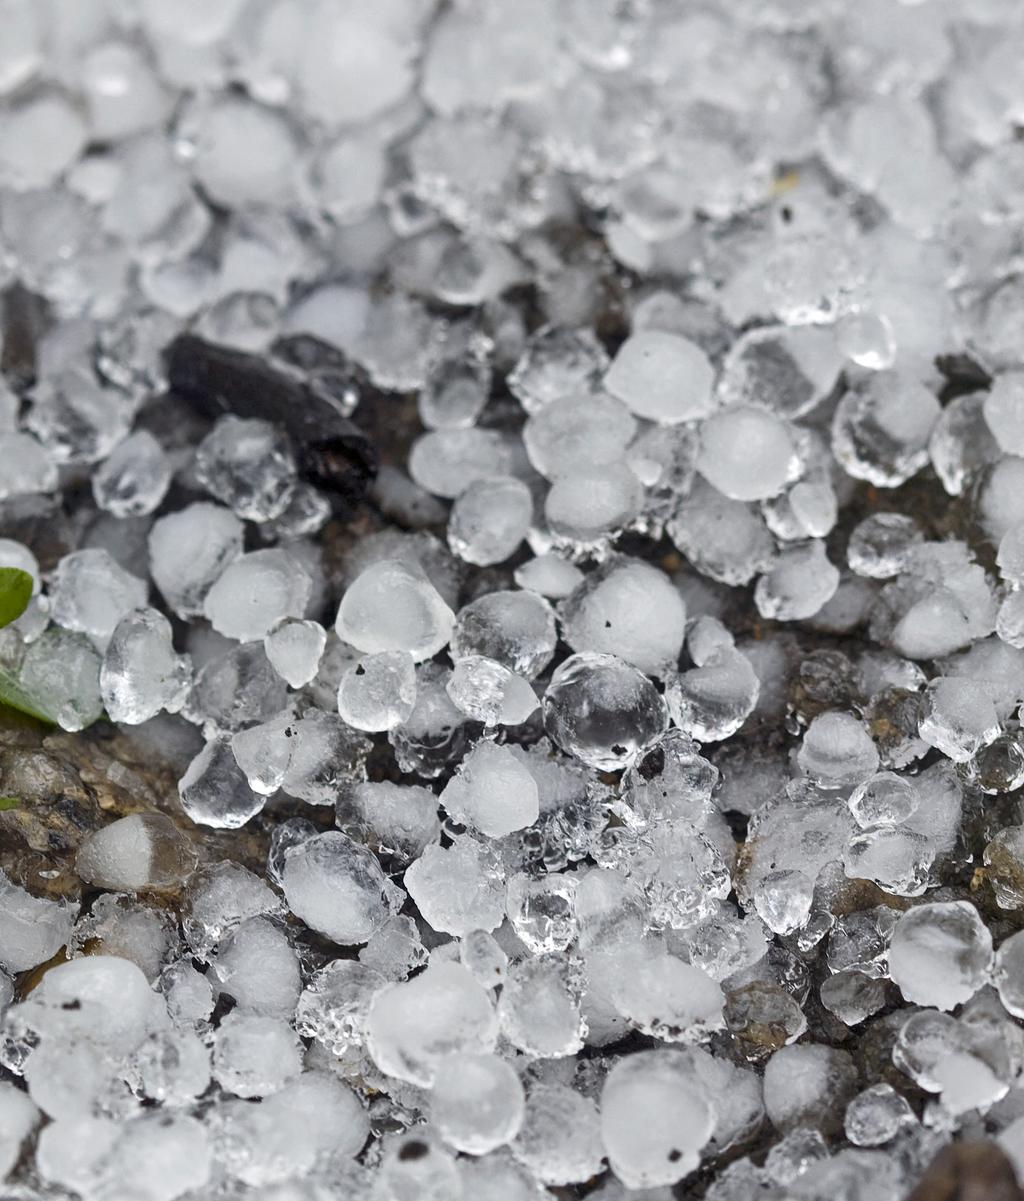 HAIL Hailstorm outbreaks can last for several days and affect multiple states and territories, but individual swaths may last for just minutes and devastate highly localized areas.